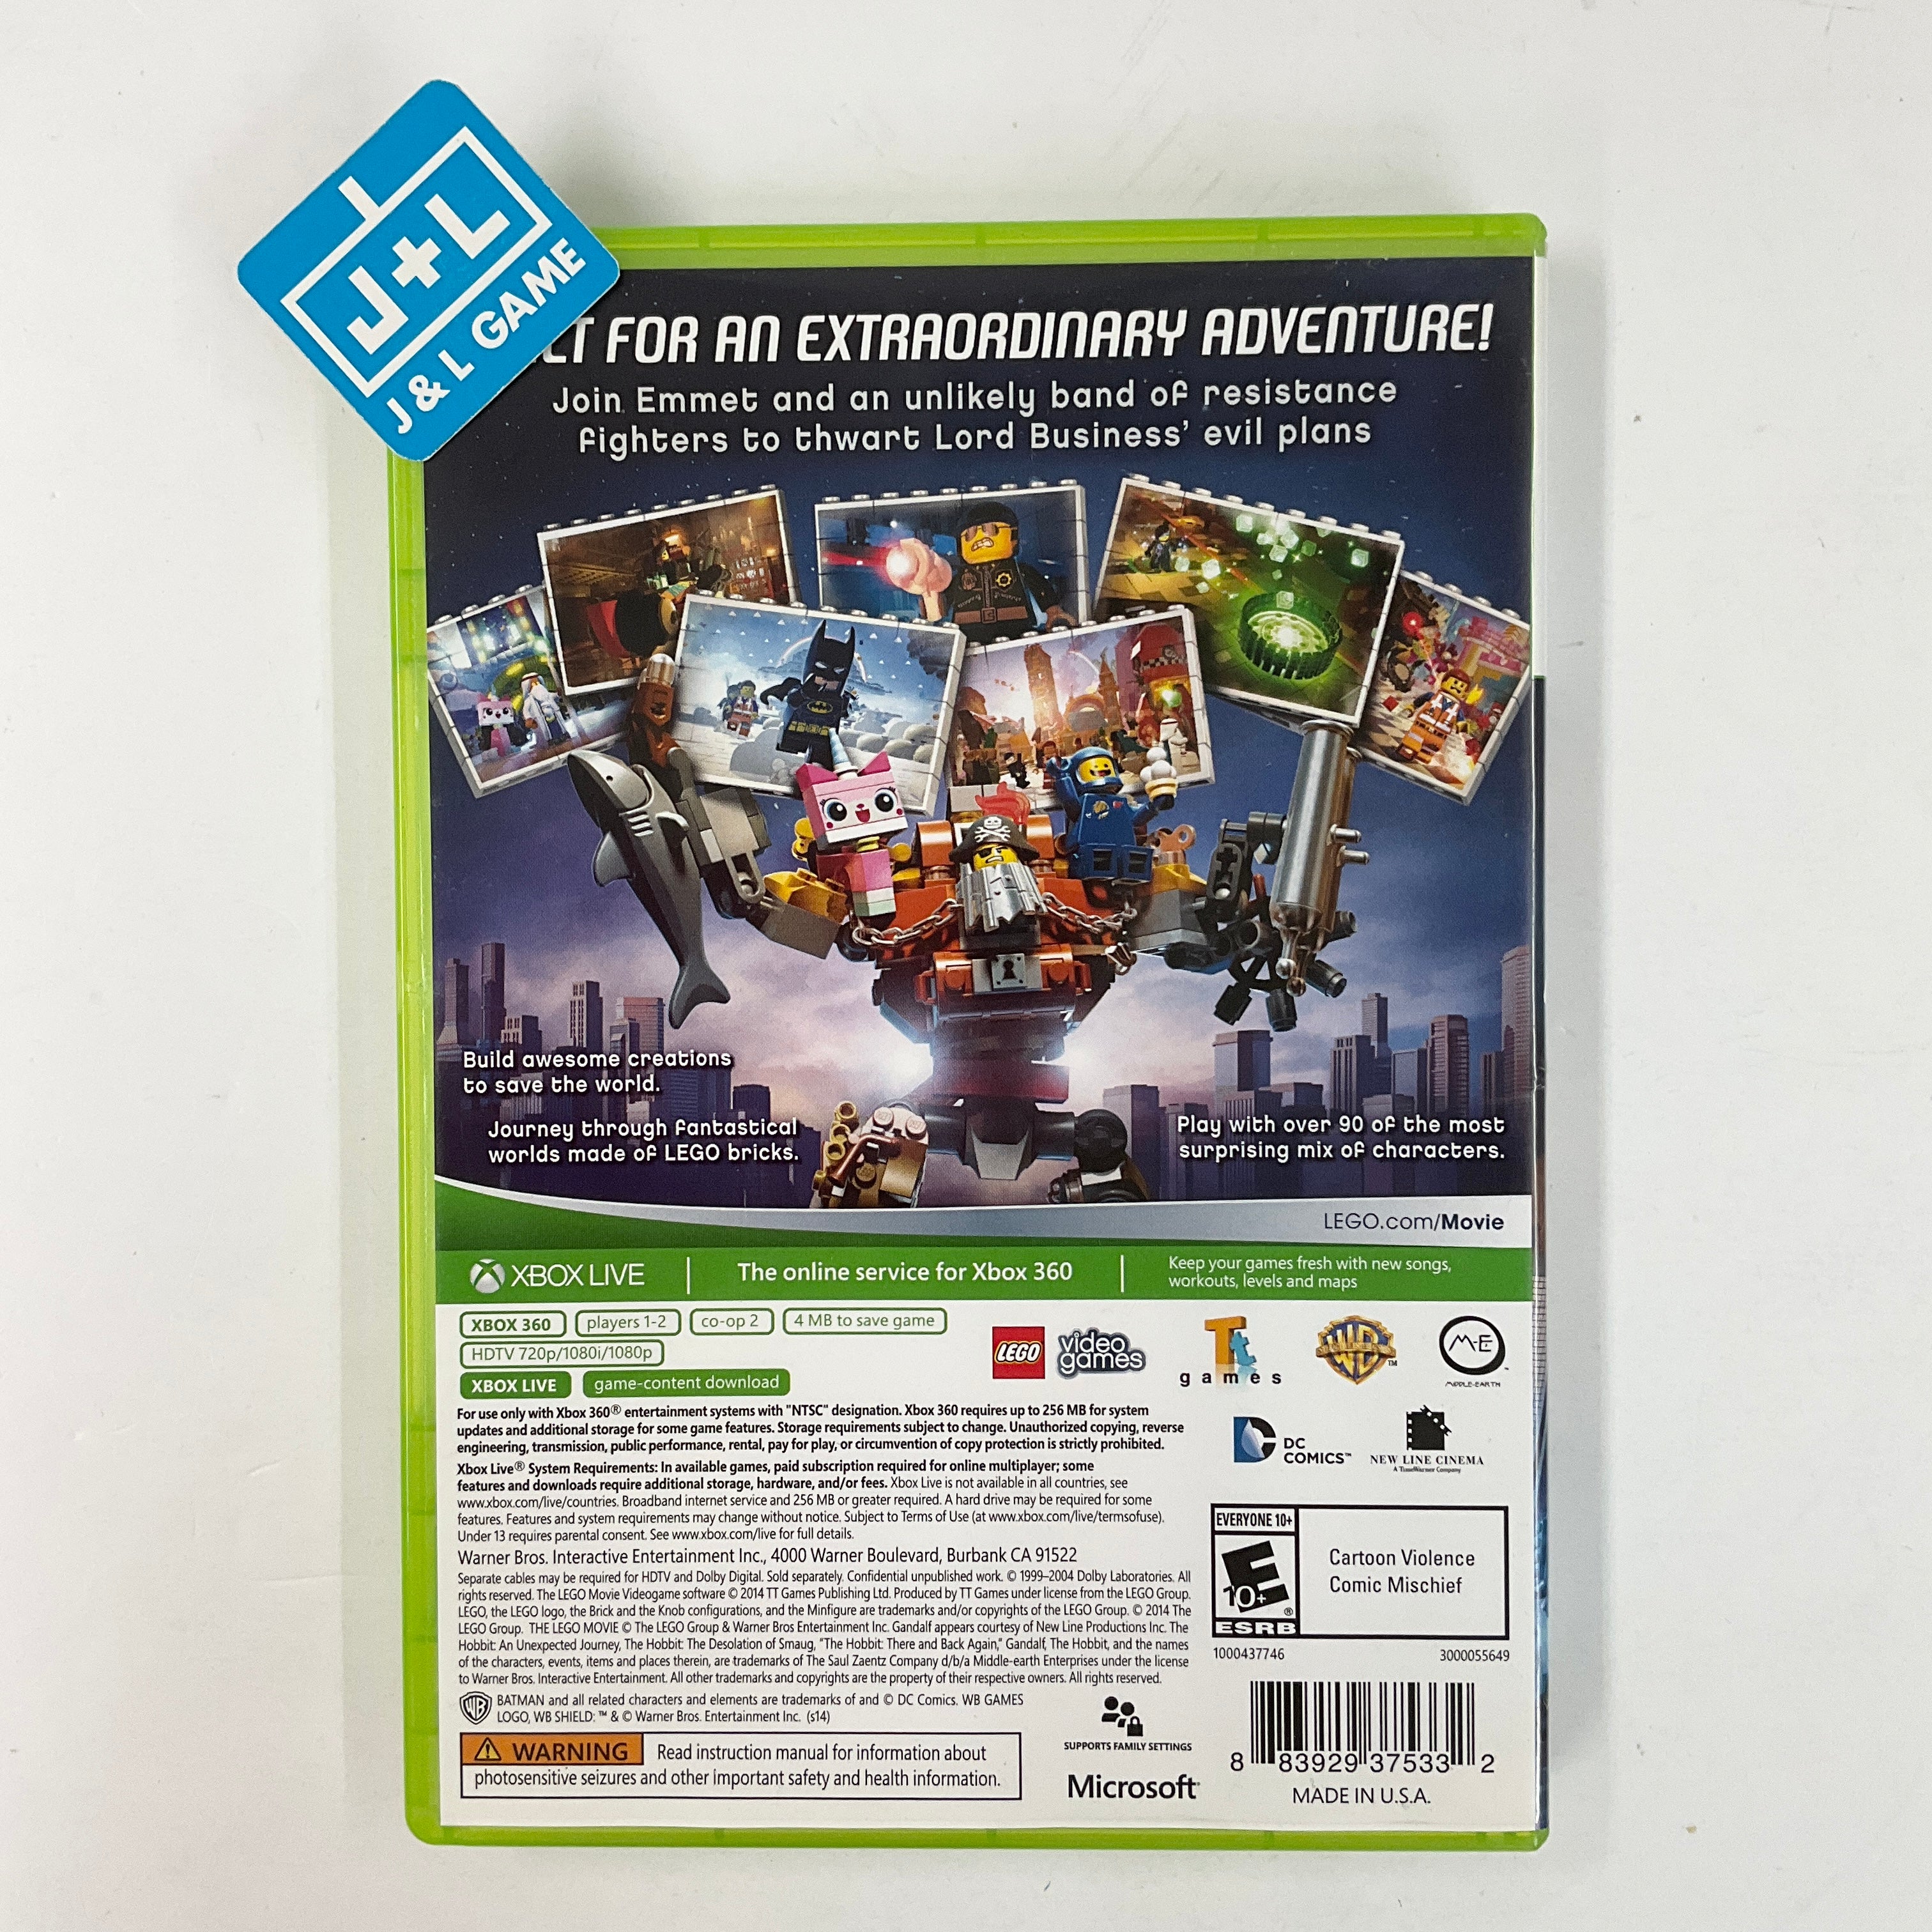 LEGO The LEGO Movie Videogame - Xbox 360 [Pre-Owned] Video Games Warner Bros. Interactive Entertainment   